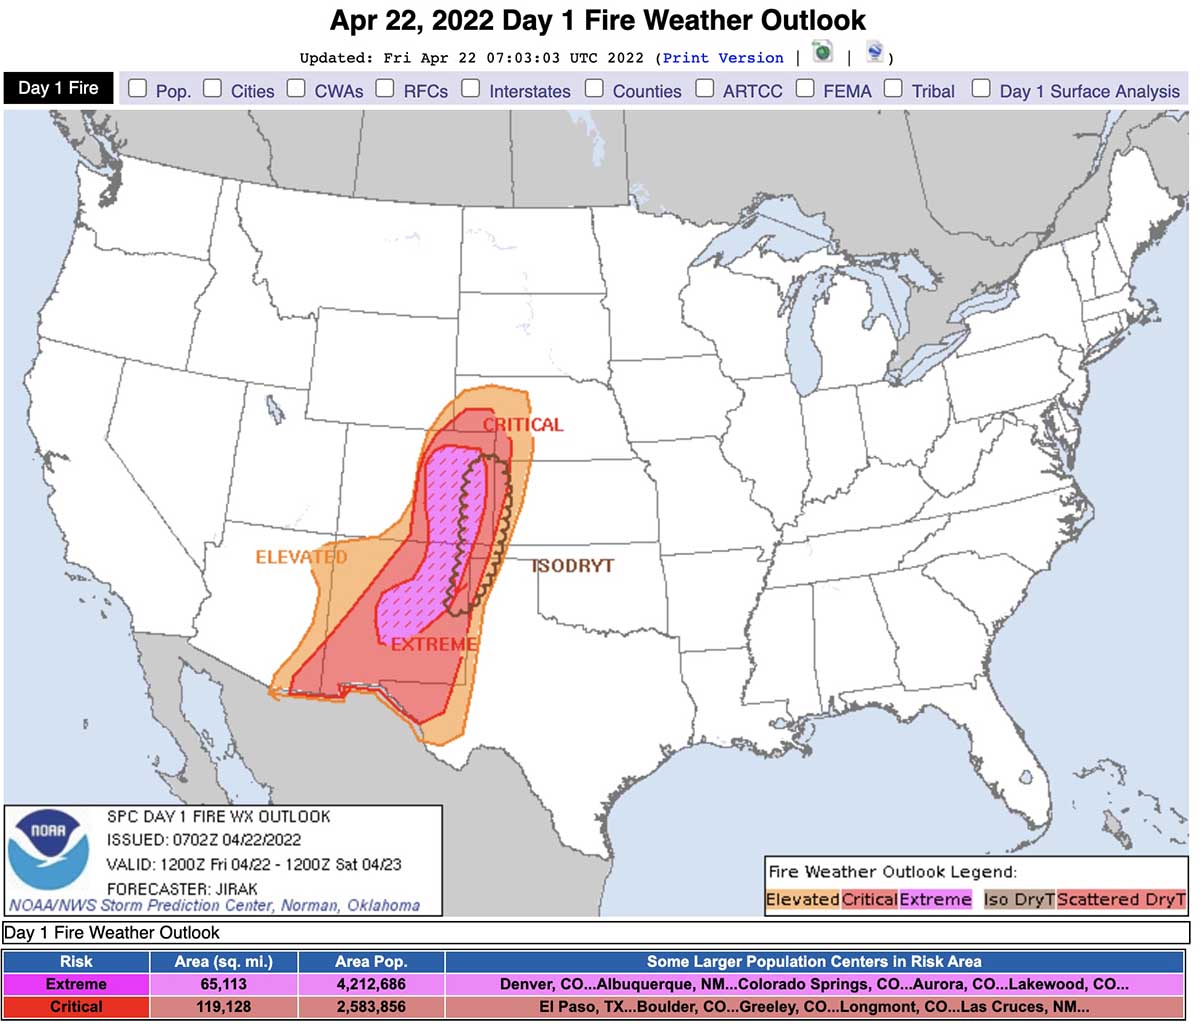 Extreme fire weather April 22, 2022